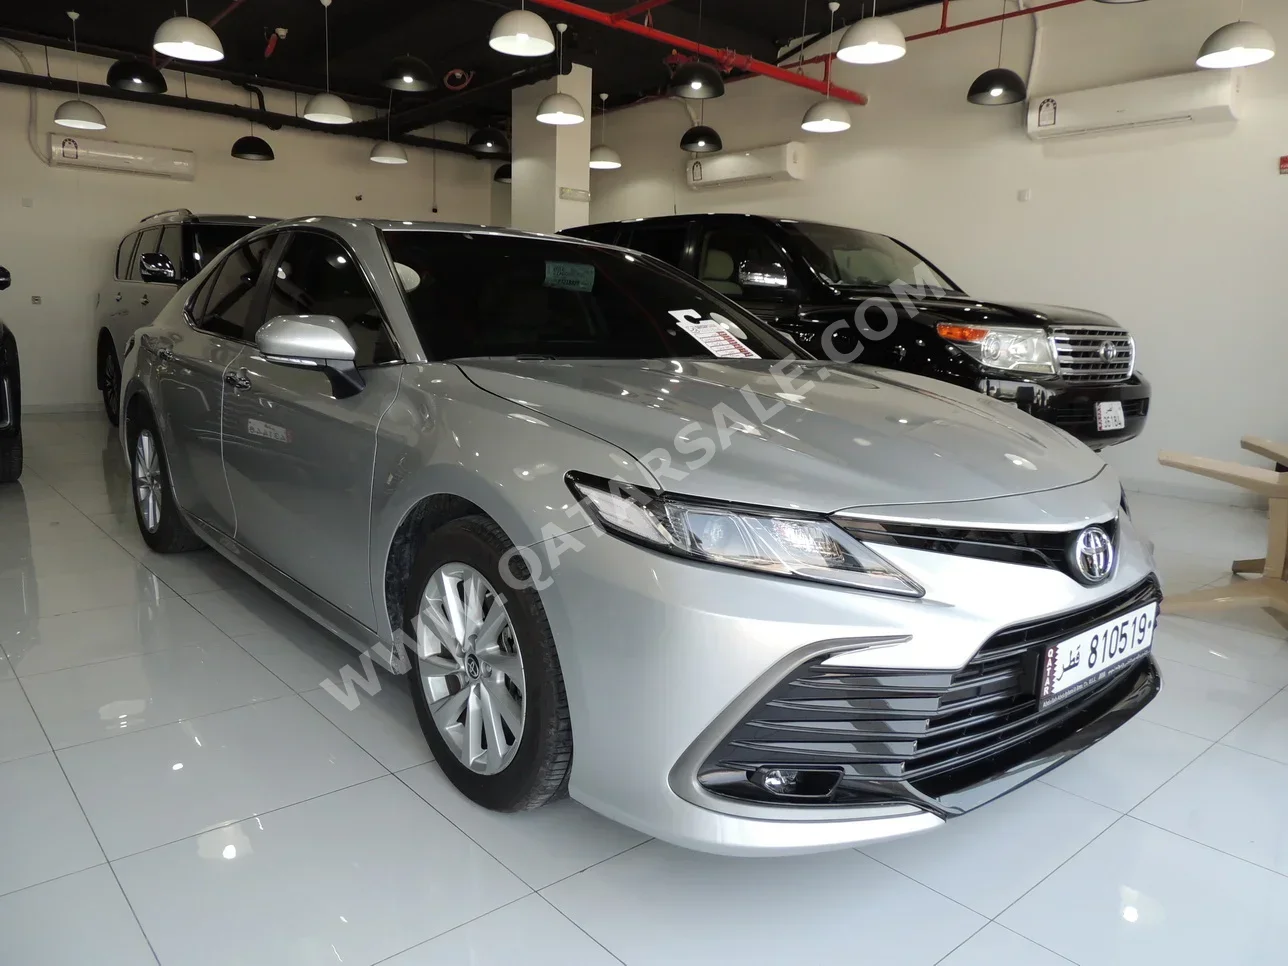 Toyota  Camry  GLE  2023  Automatic  13,000 Km  4 Cylinder  Front Wheel Drive (FWD)  Sedan  Silver